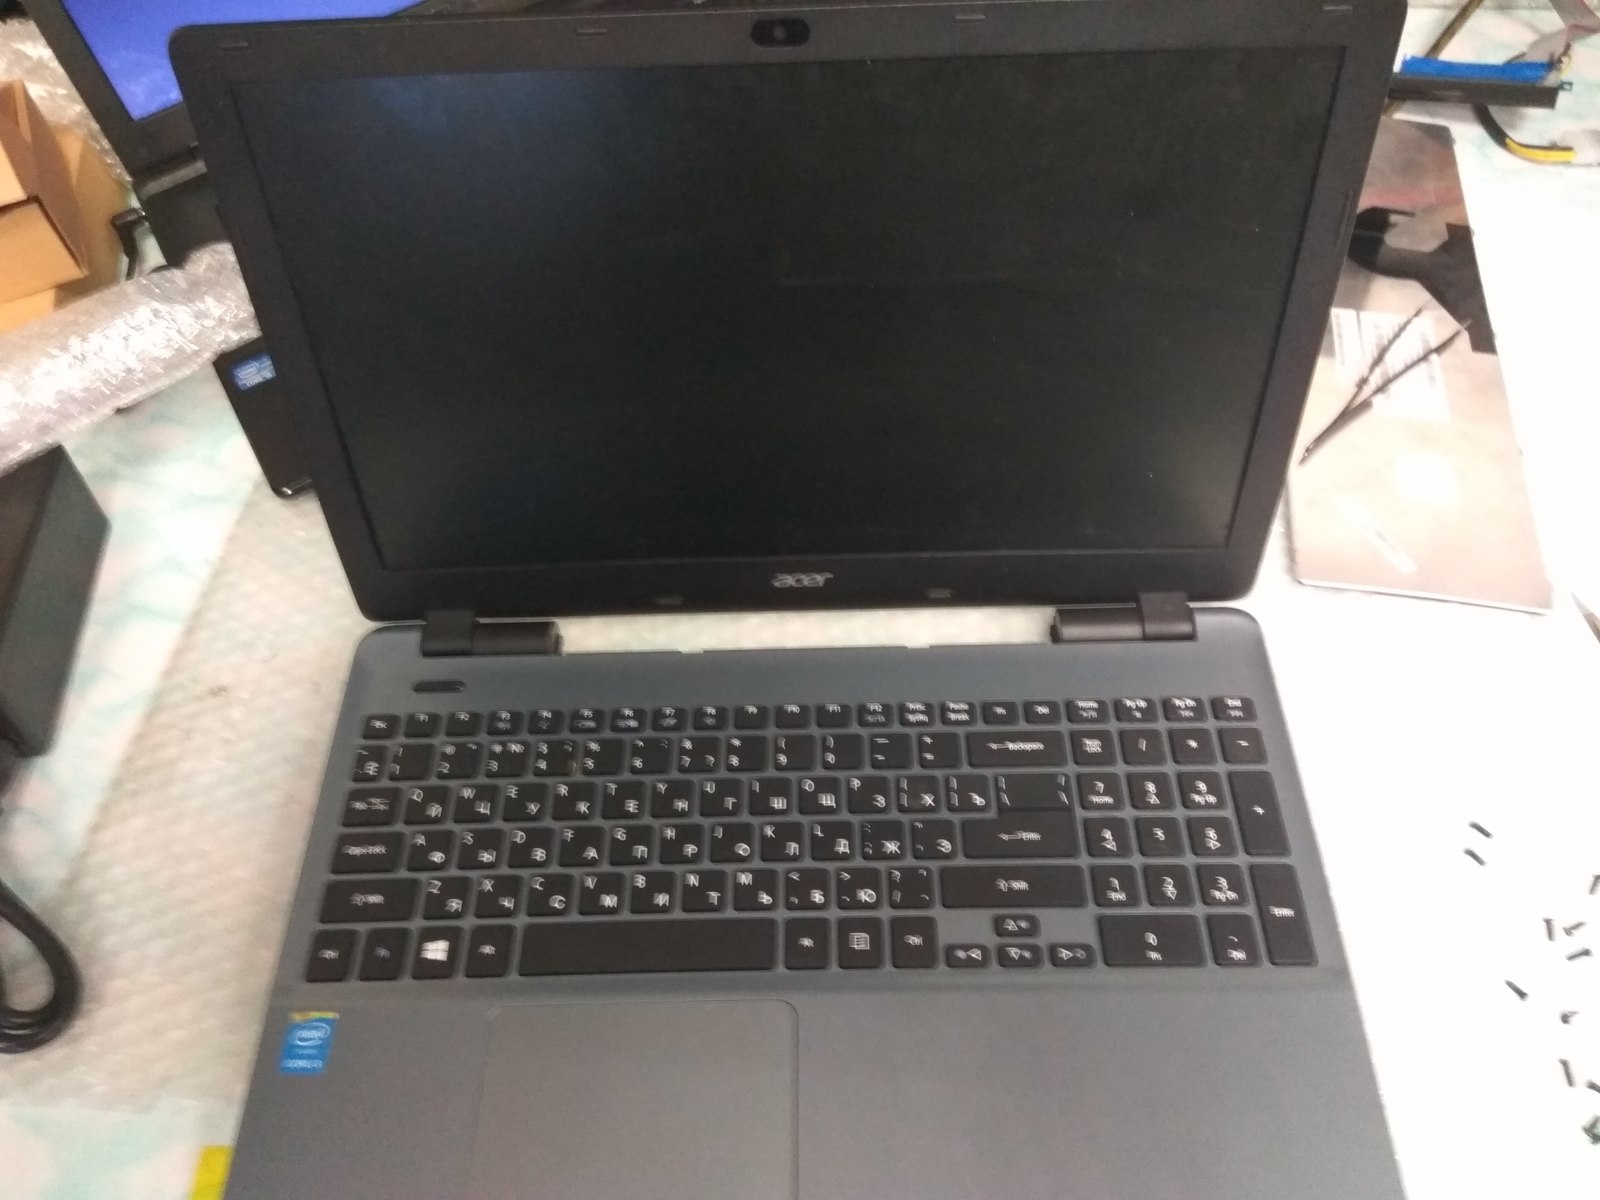 Acer e5 laptop repair after flooding and other service. - My, Repair of equipment, Repairers Community, Screenshot, Computer, Longpost